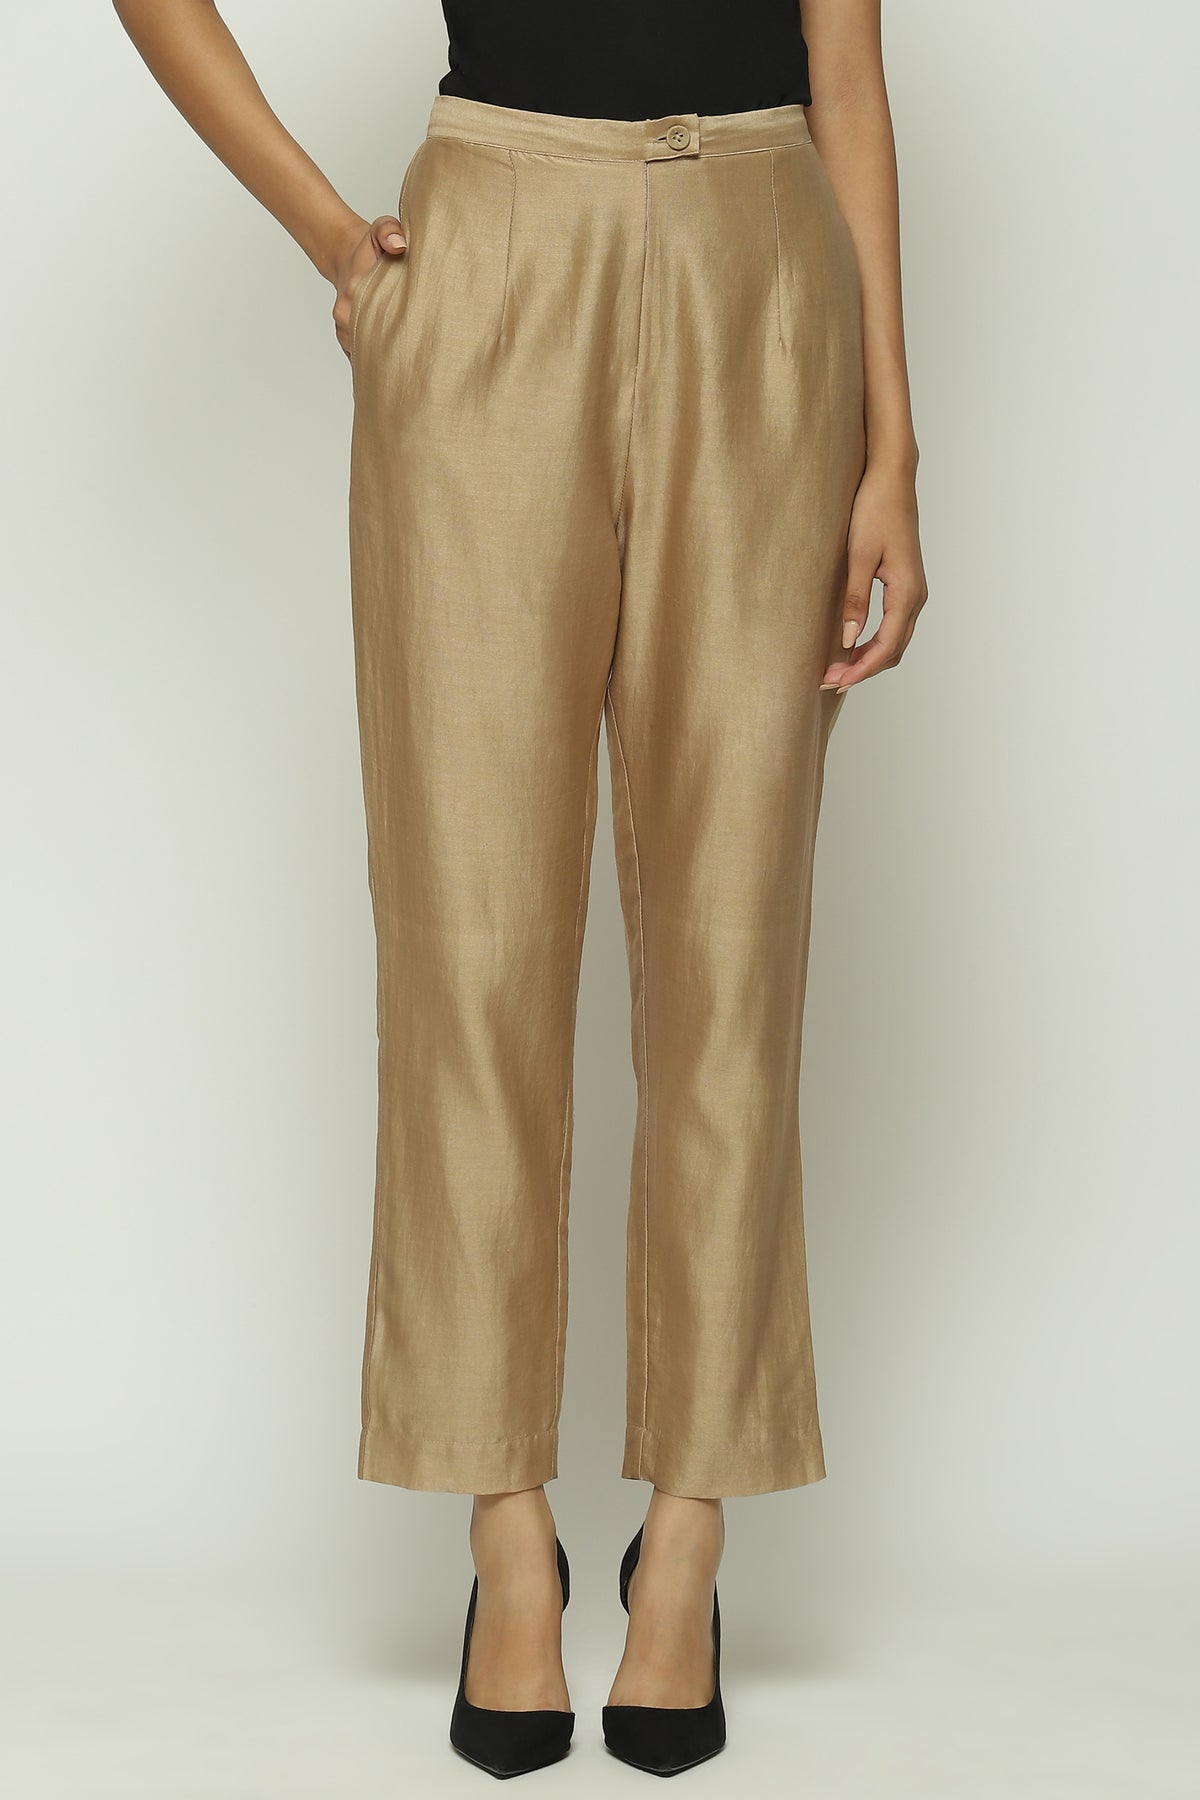 Solid Classics Biscuit Trouser